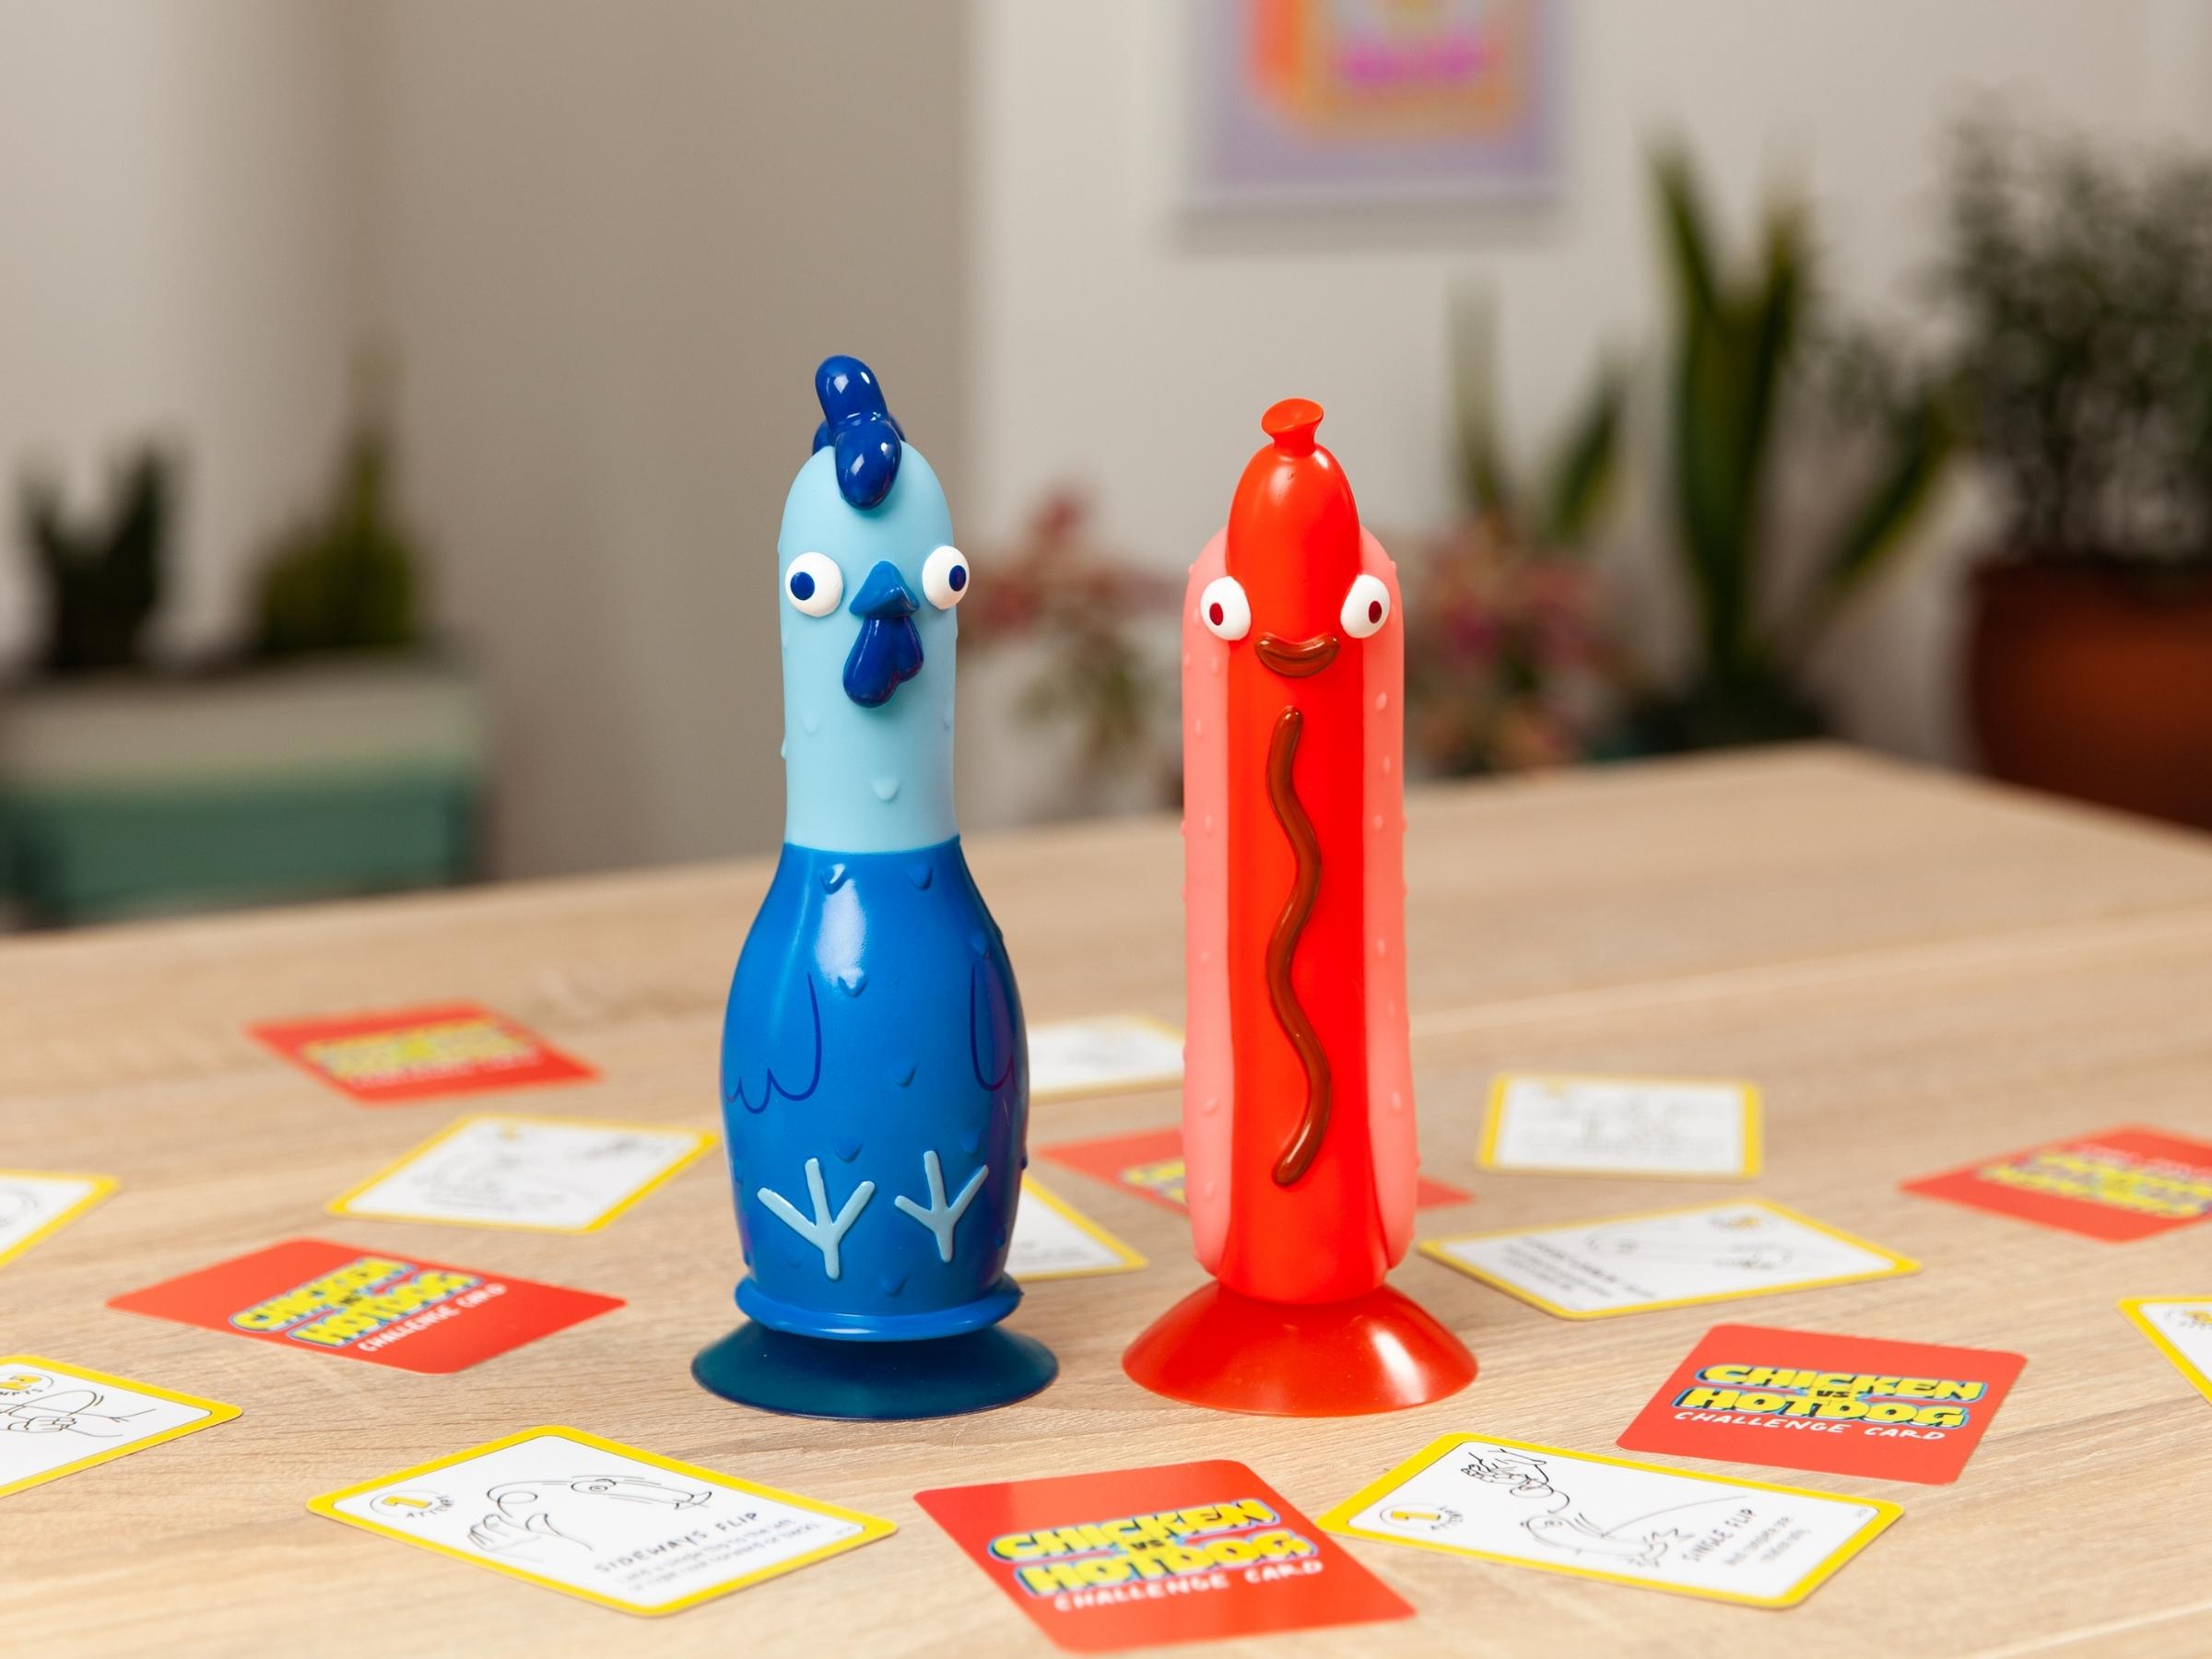 Big Potato - Chicken vs Hotdog : The Fun, Flipping Party Game, Perfect for  Family Game Night